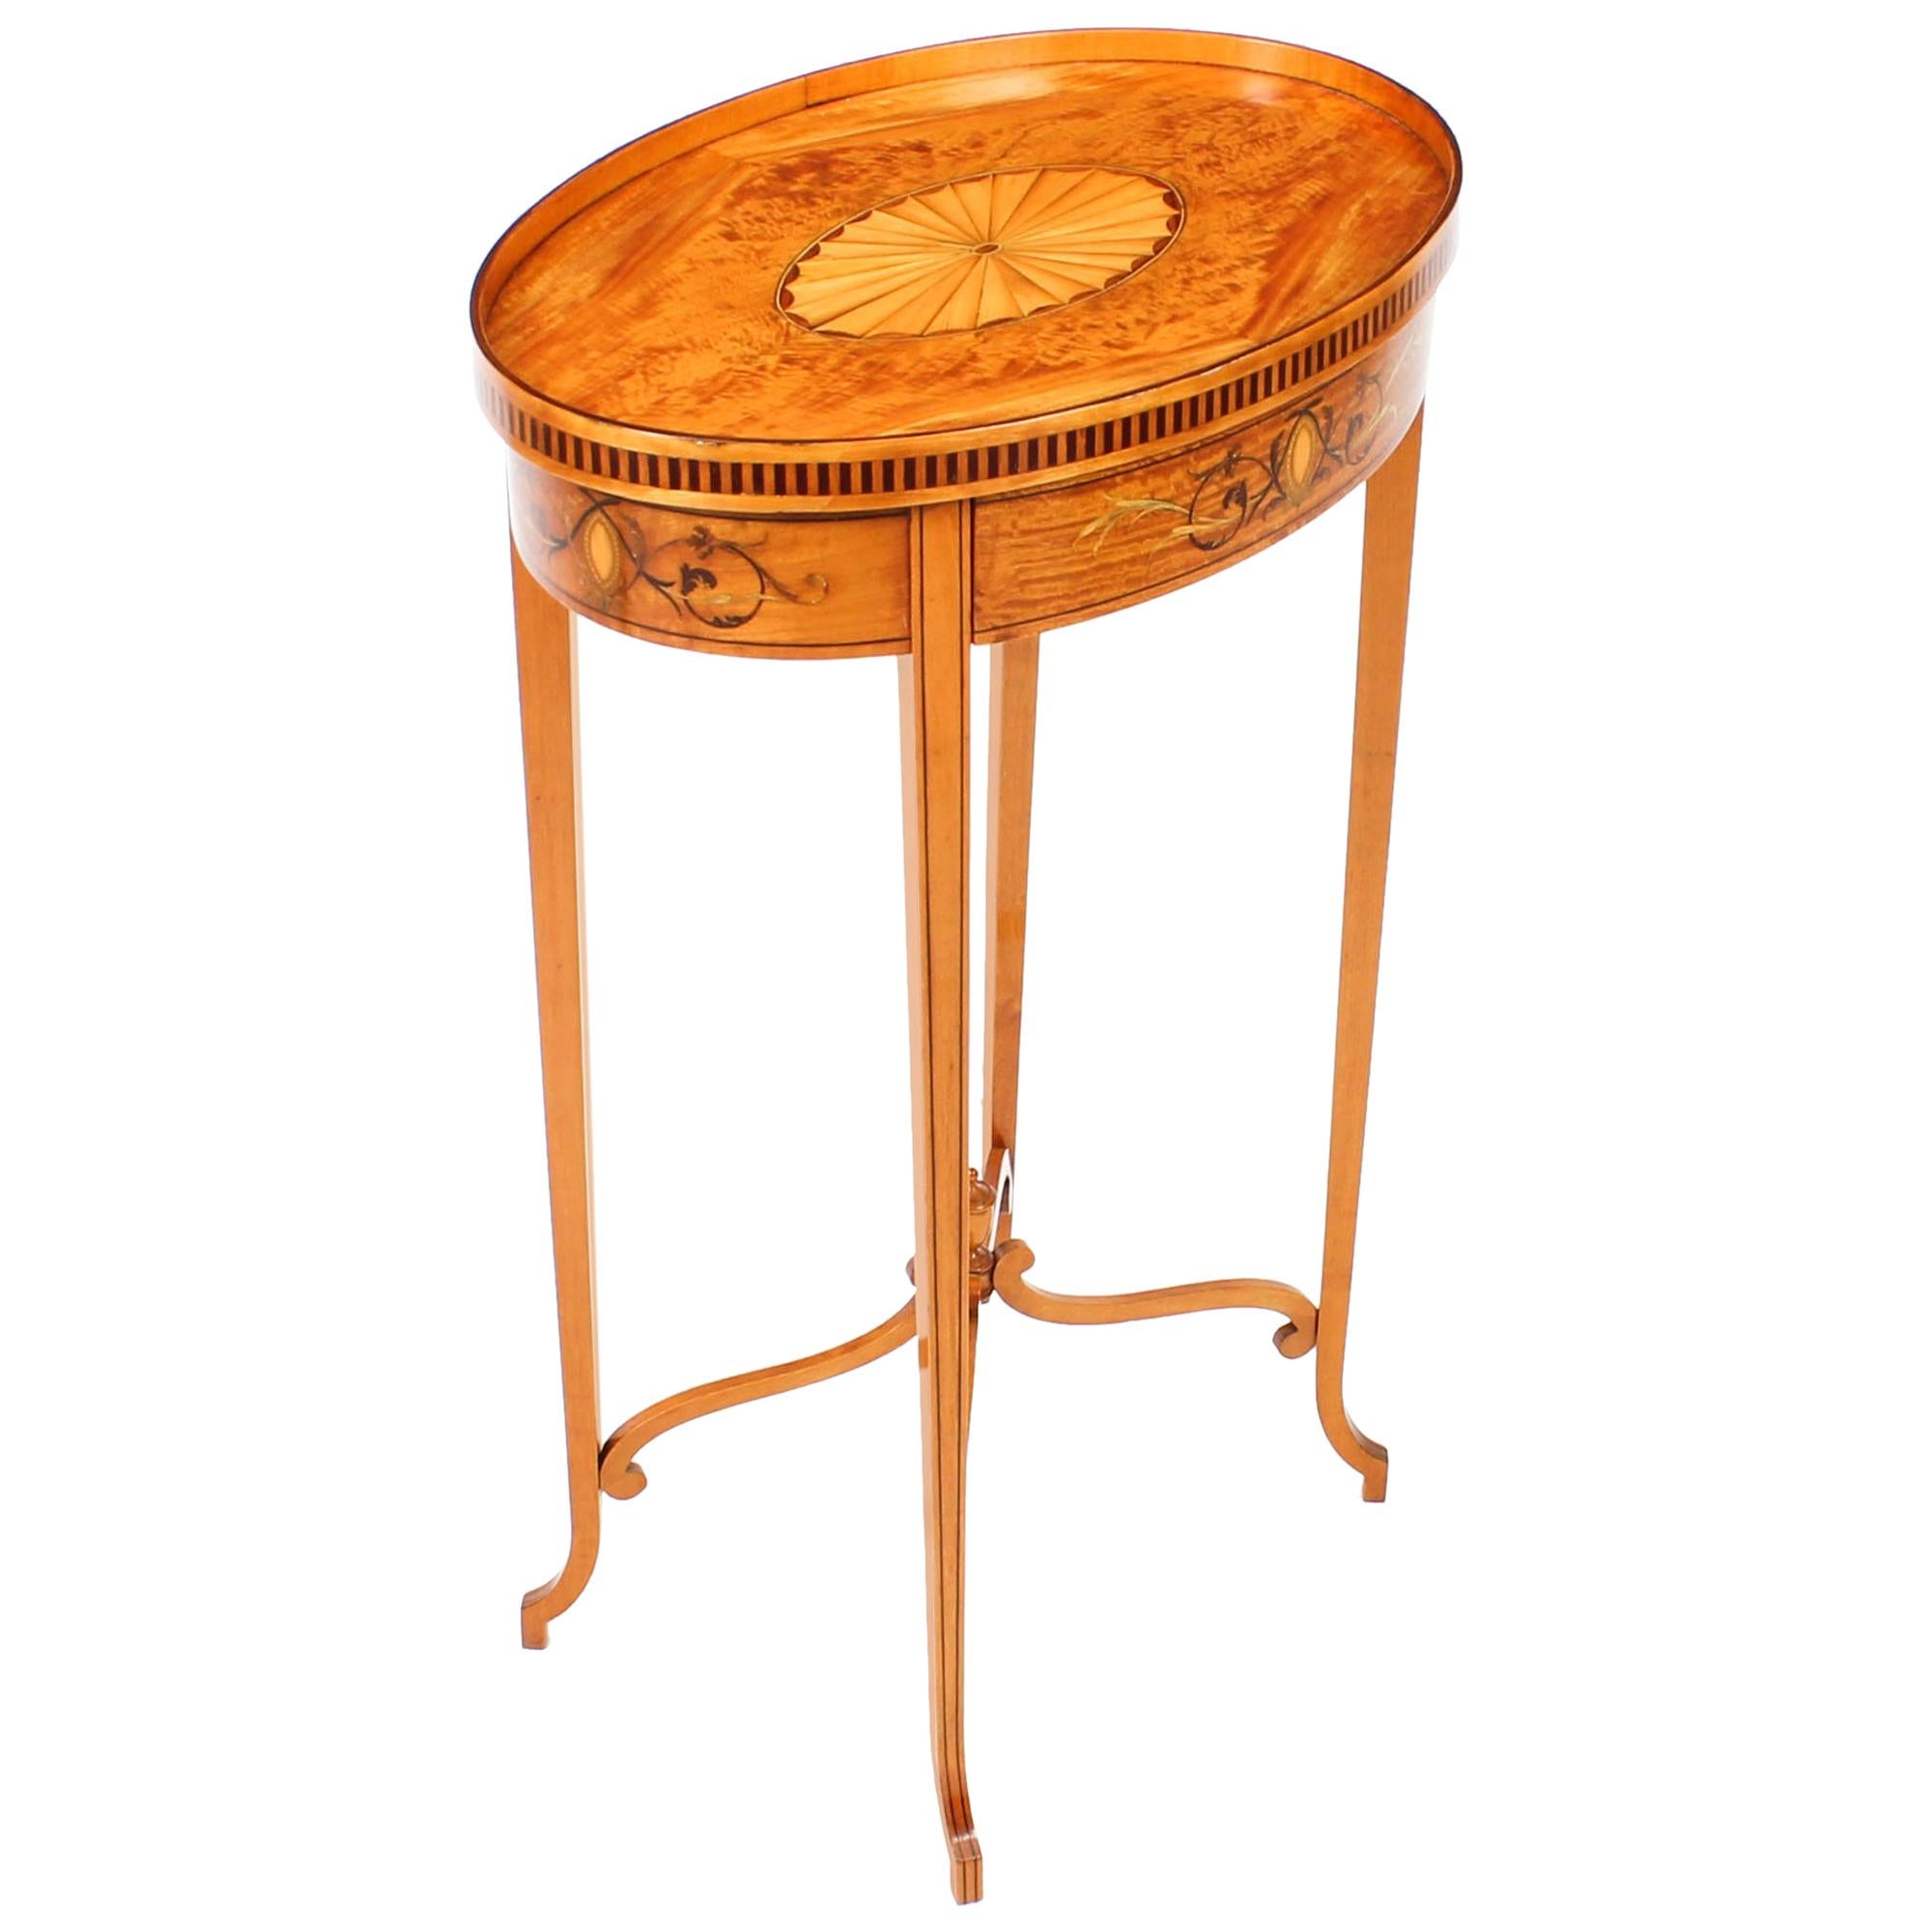 Antique Marquetry & Shell Inlaid Satinwood Oval Occasional Table, 19th Century